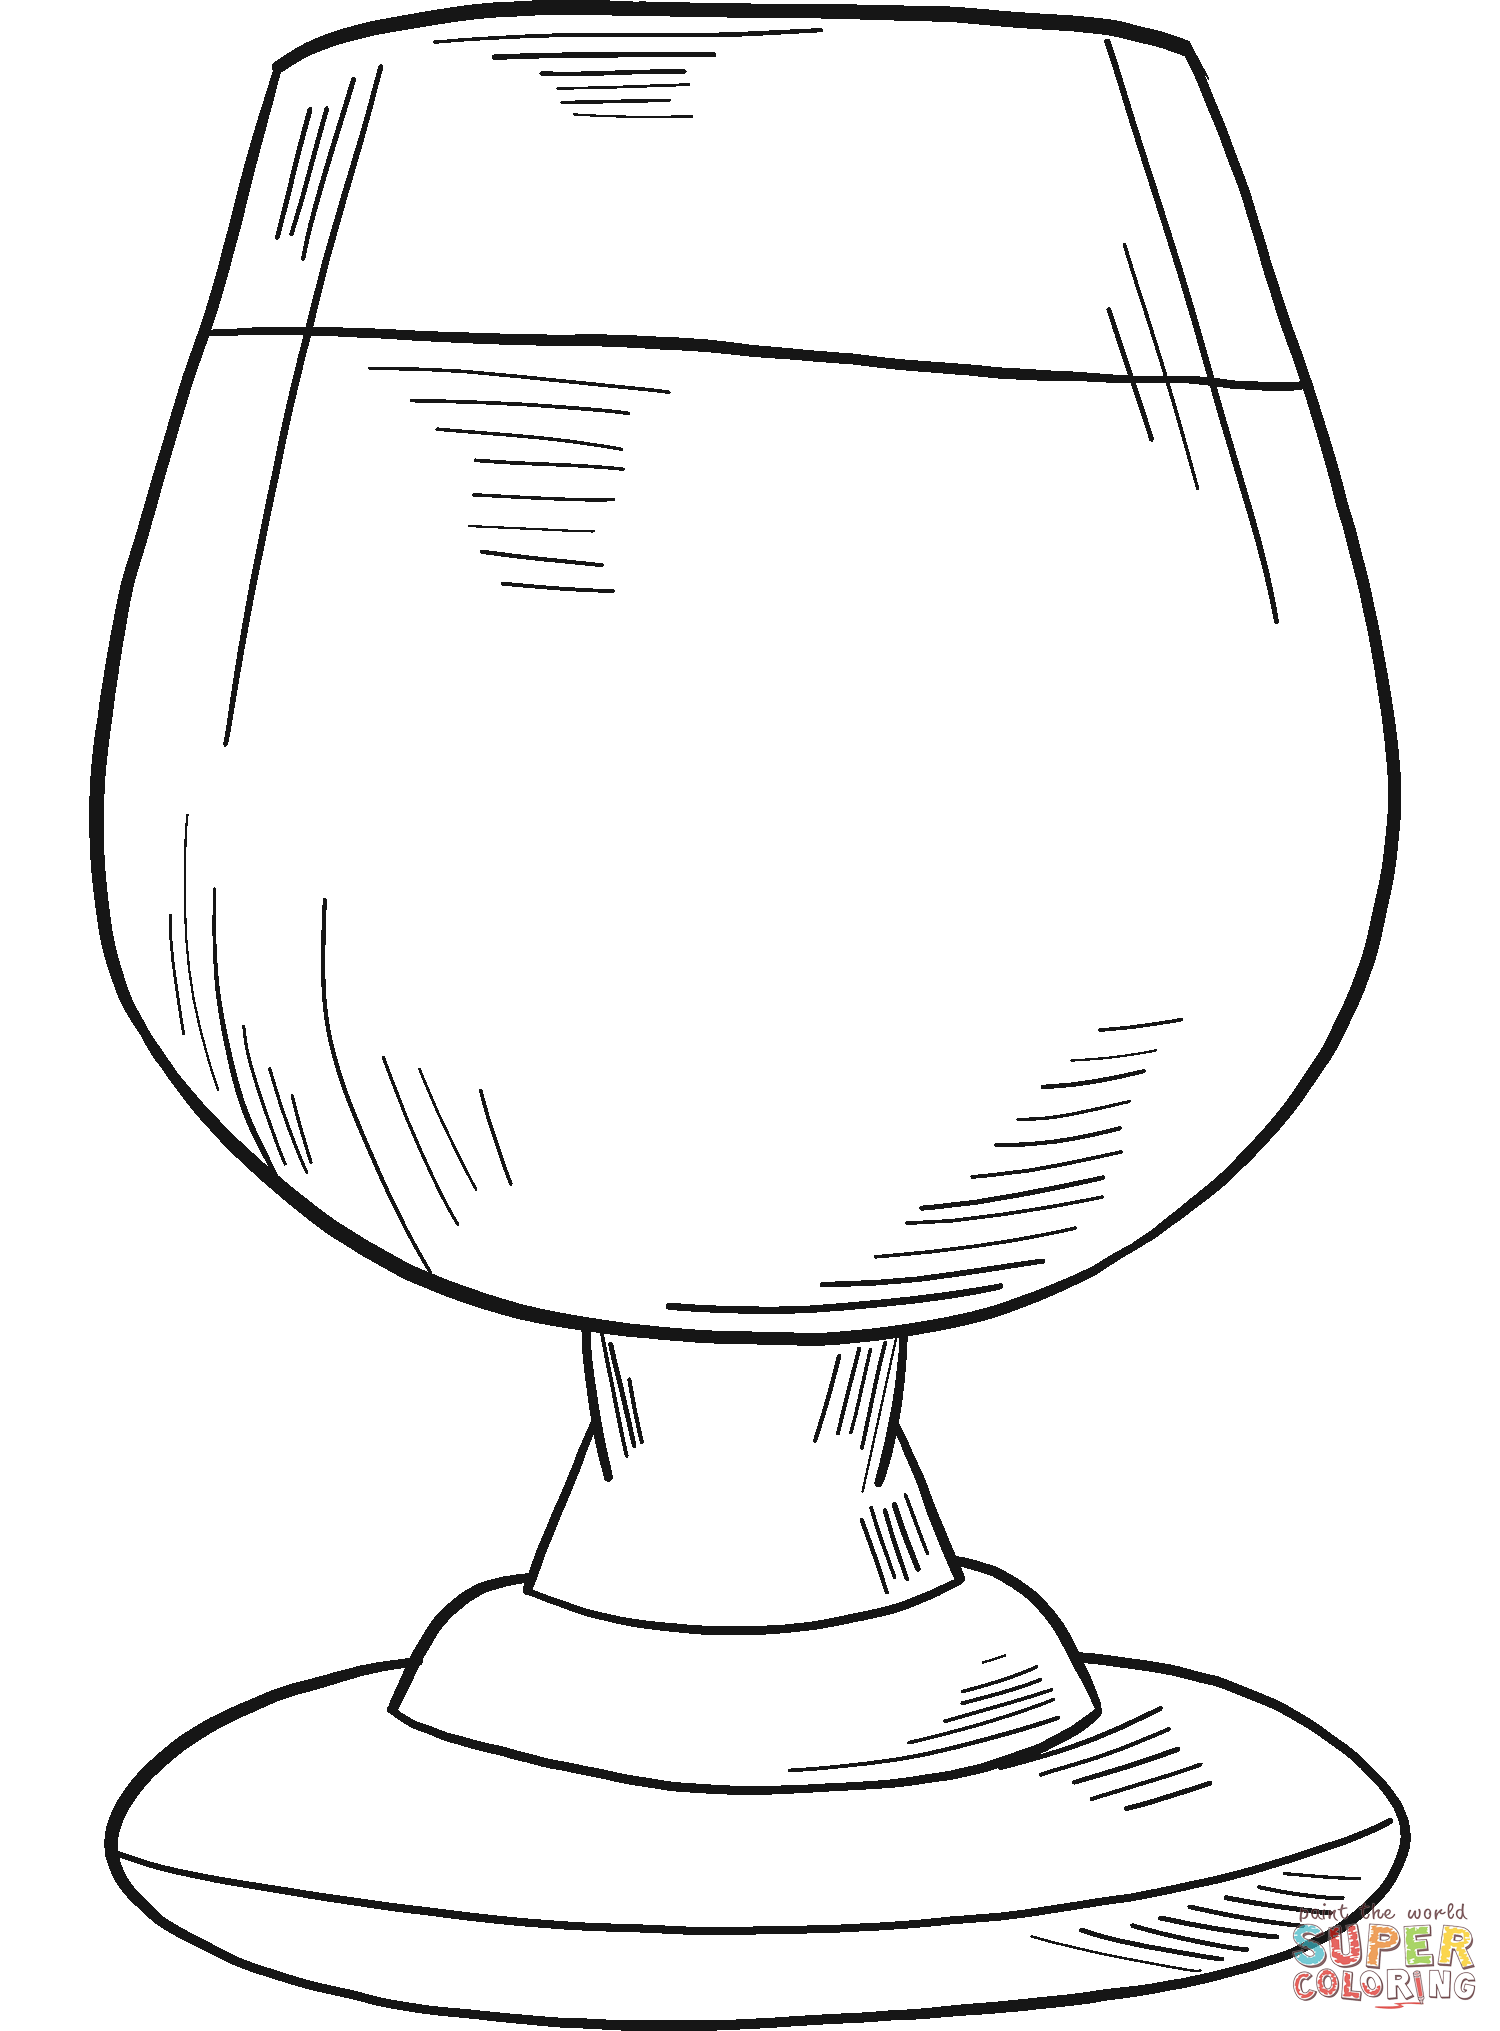 Glass of Alcoholic Drink coloring page | Free Printable Coloring Pages